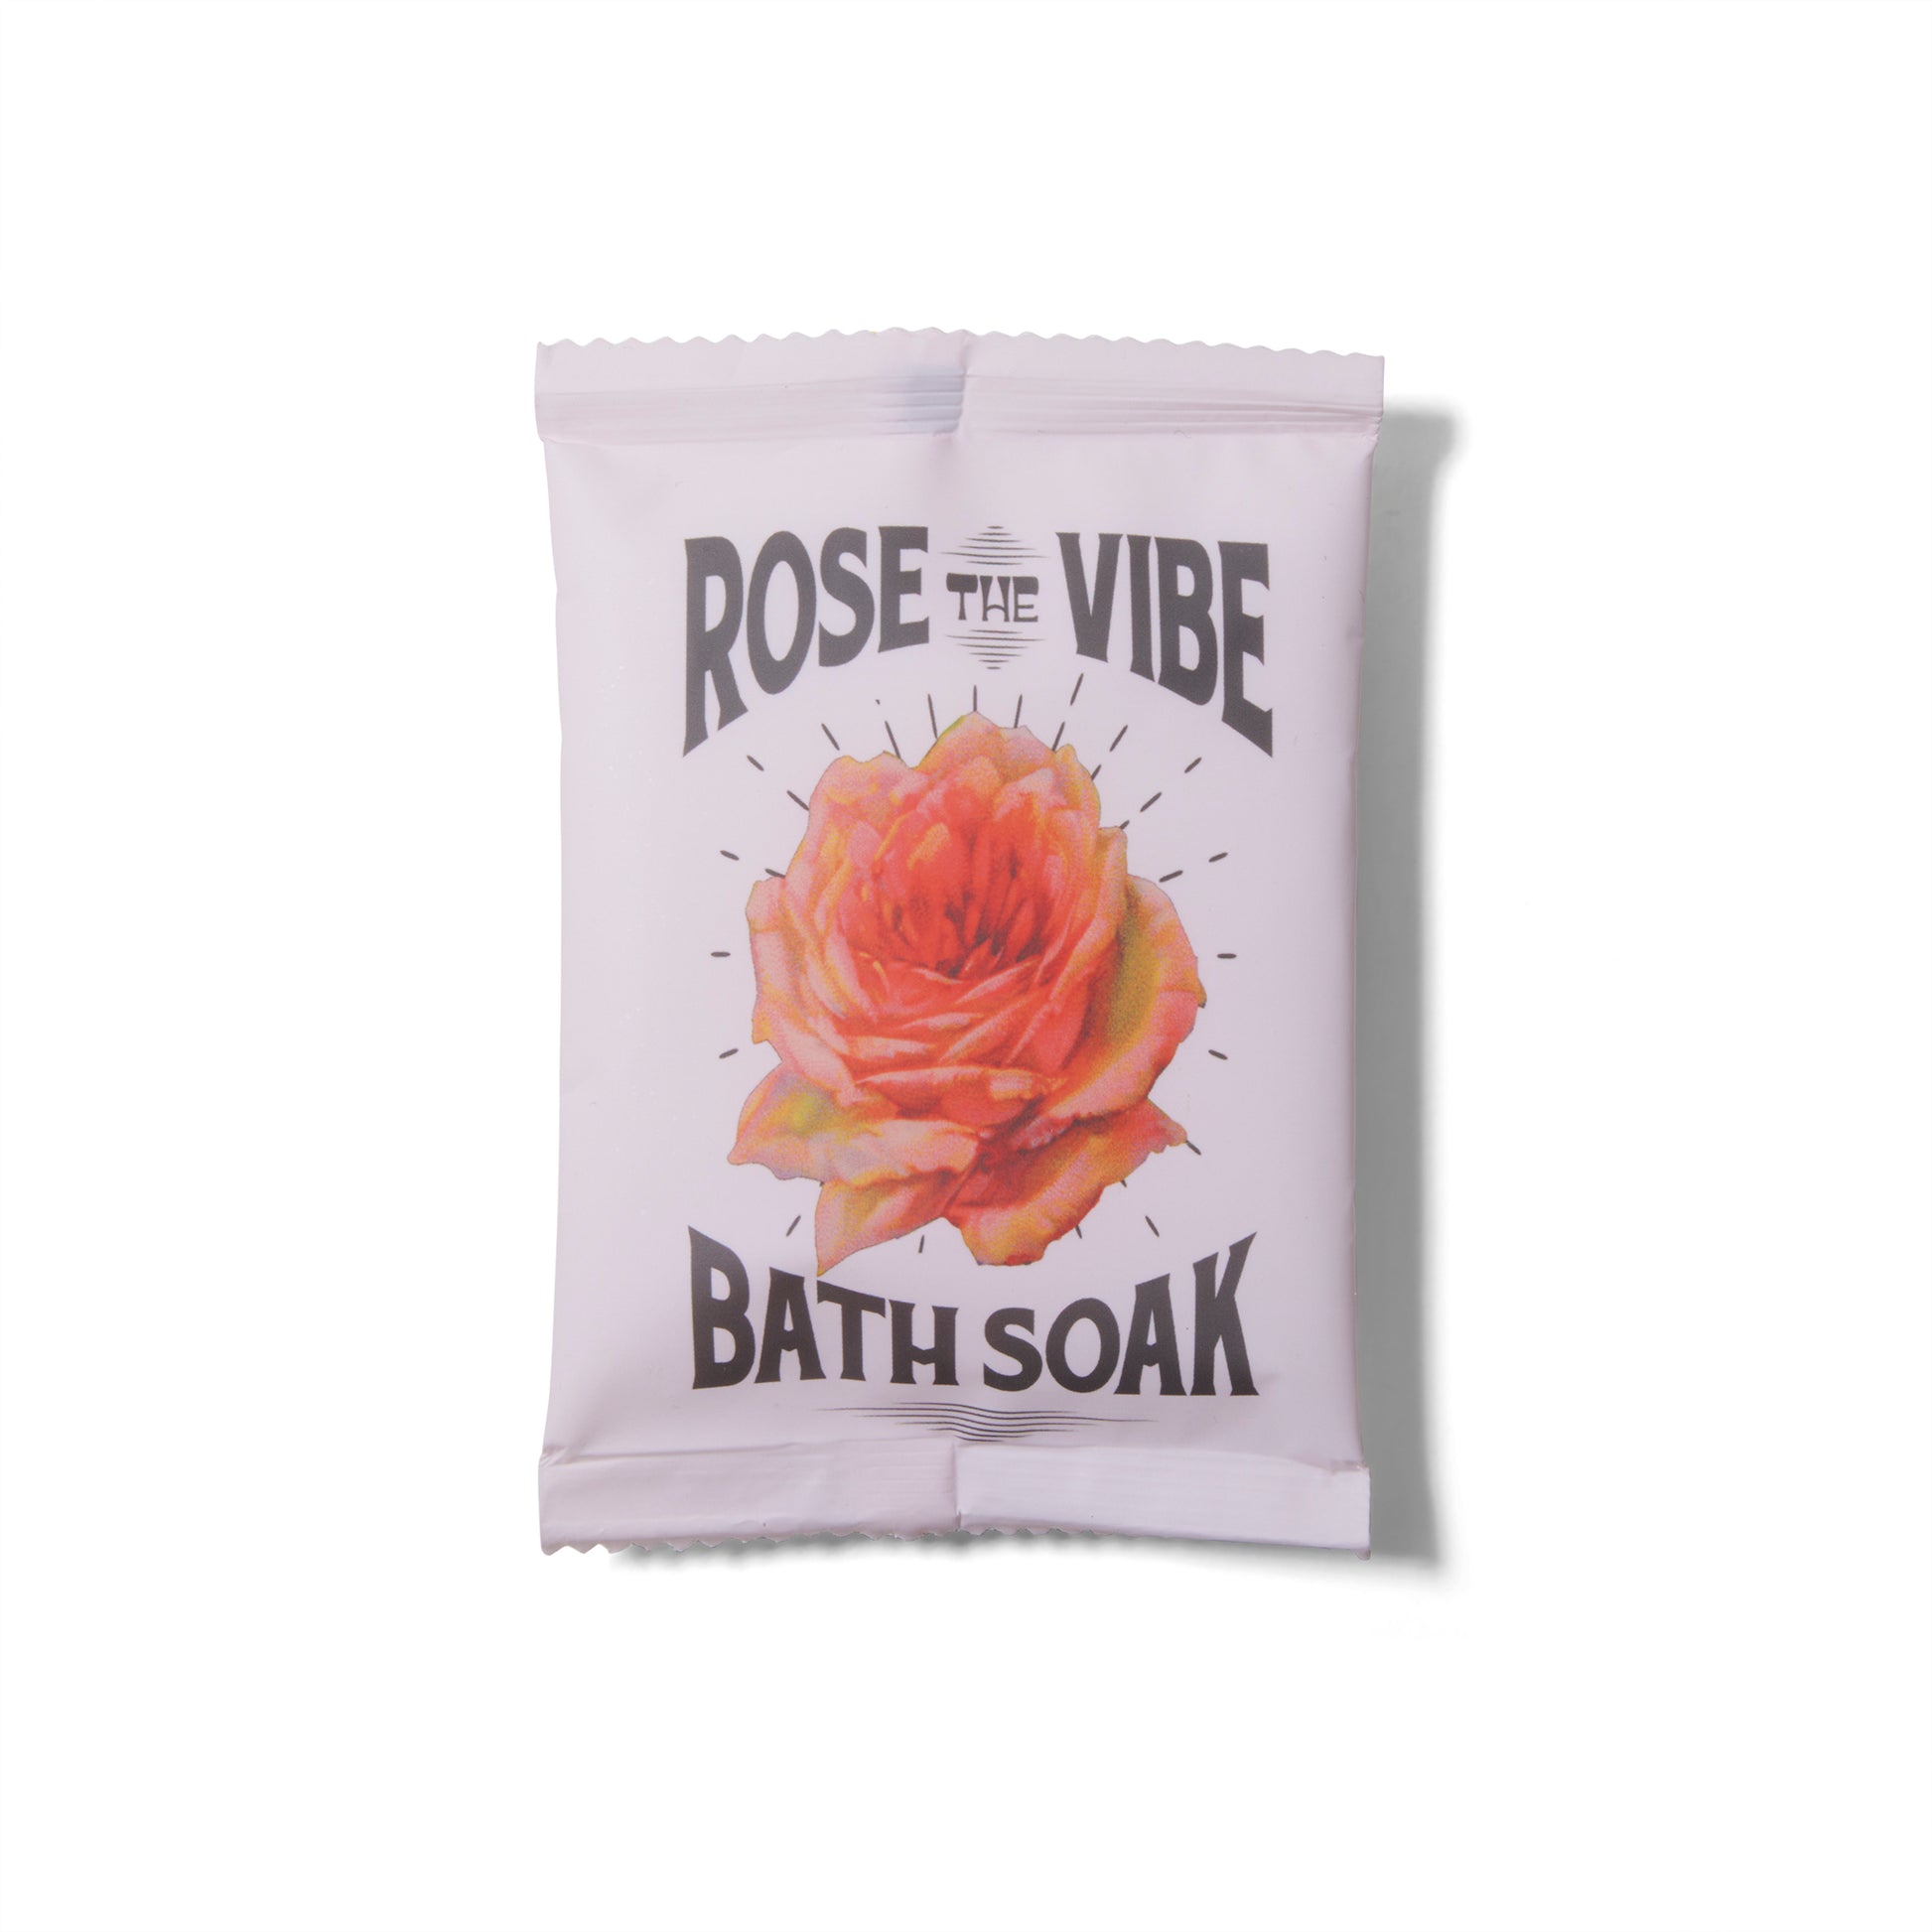 The Wild Yonder Bath Soak Salts in Rose the Vibe. There is an illustration of a rose on the package. 